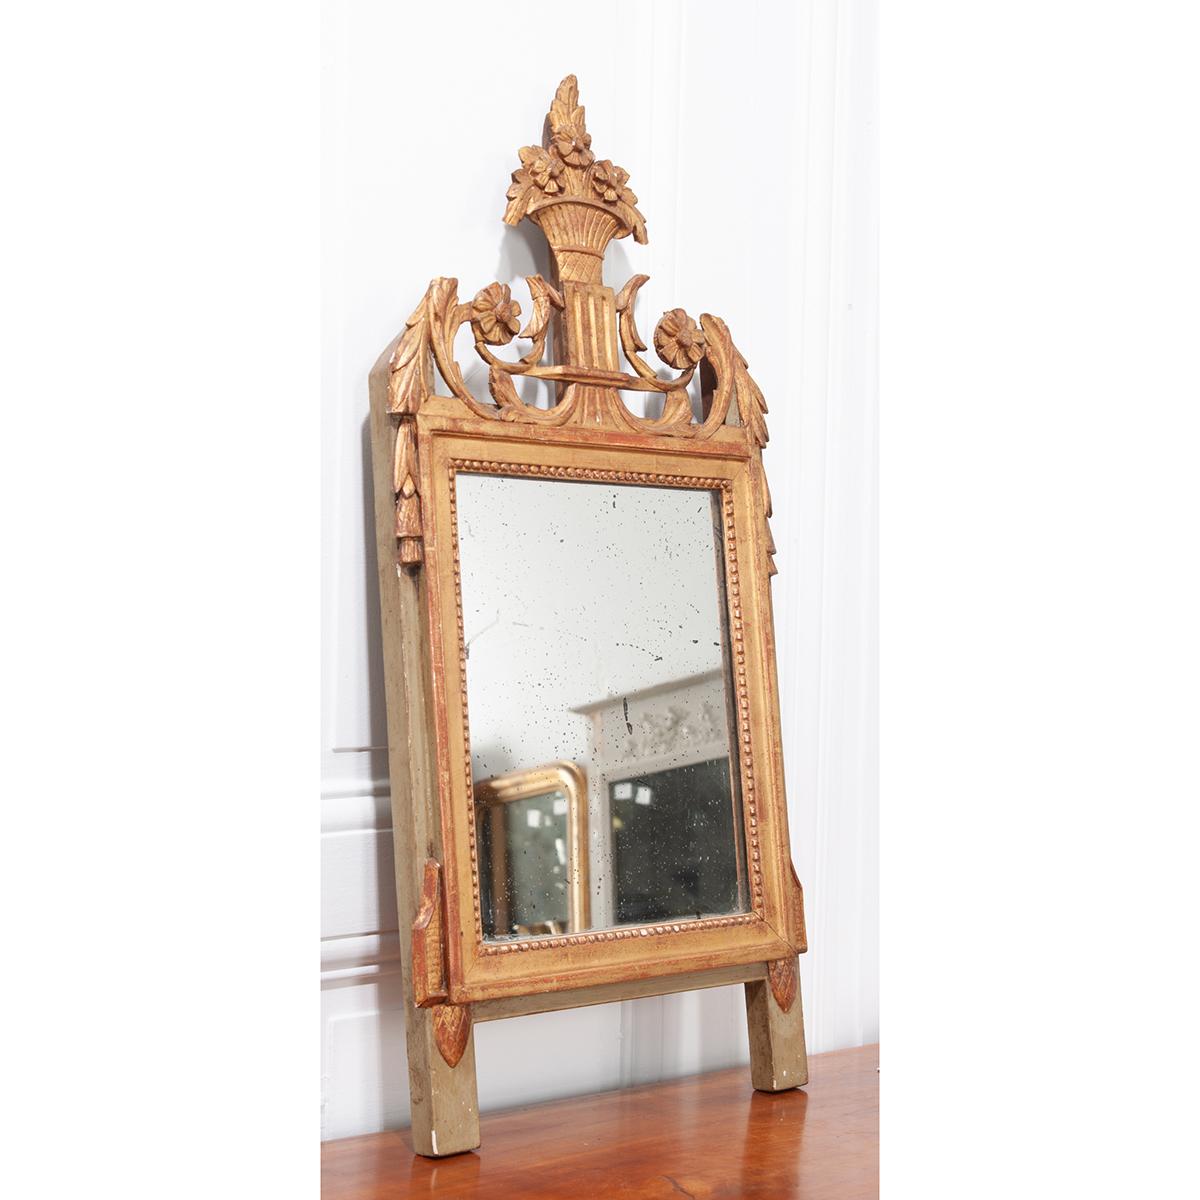 A darling, carved giltwood mirror. This petite mirror has a wonderful crest that features floral and foliate carvings, scrolled filigree and acanthus leaves. The original glass remains intact and adds great character with tons of foxing. The glass